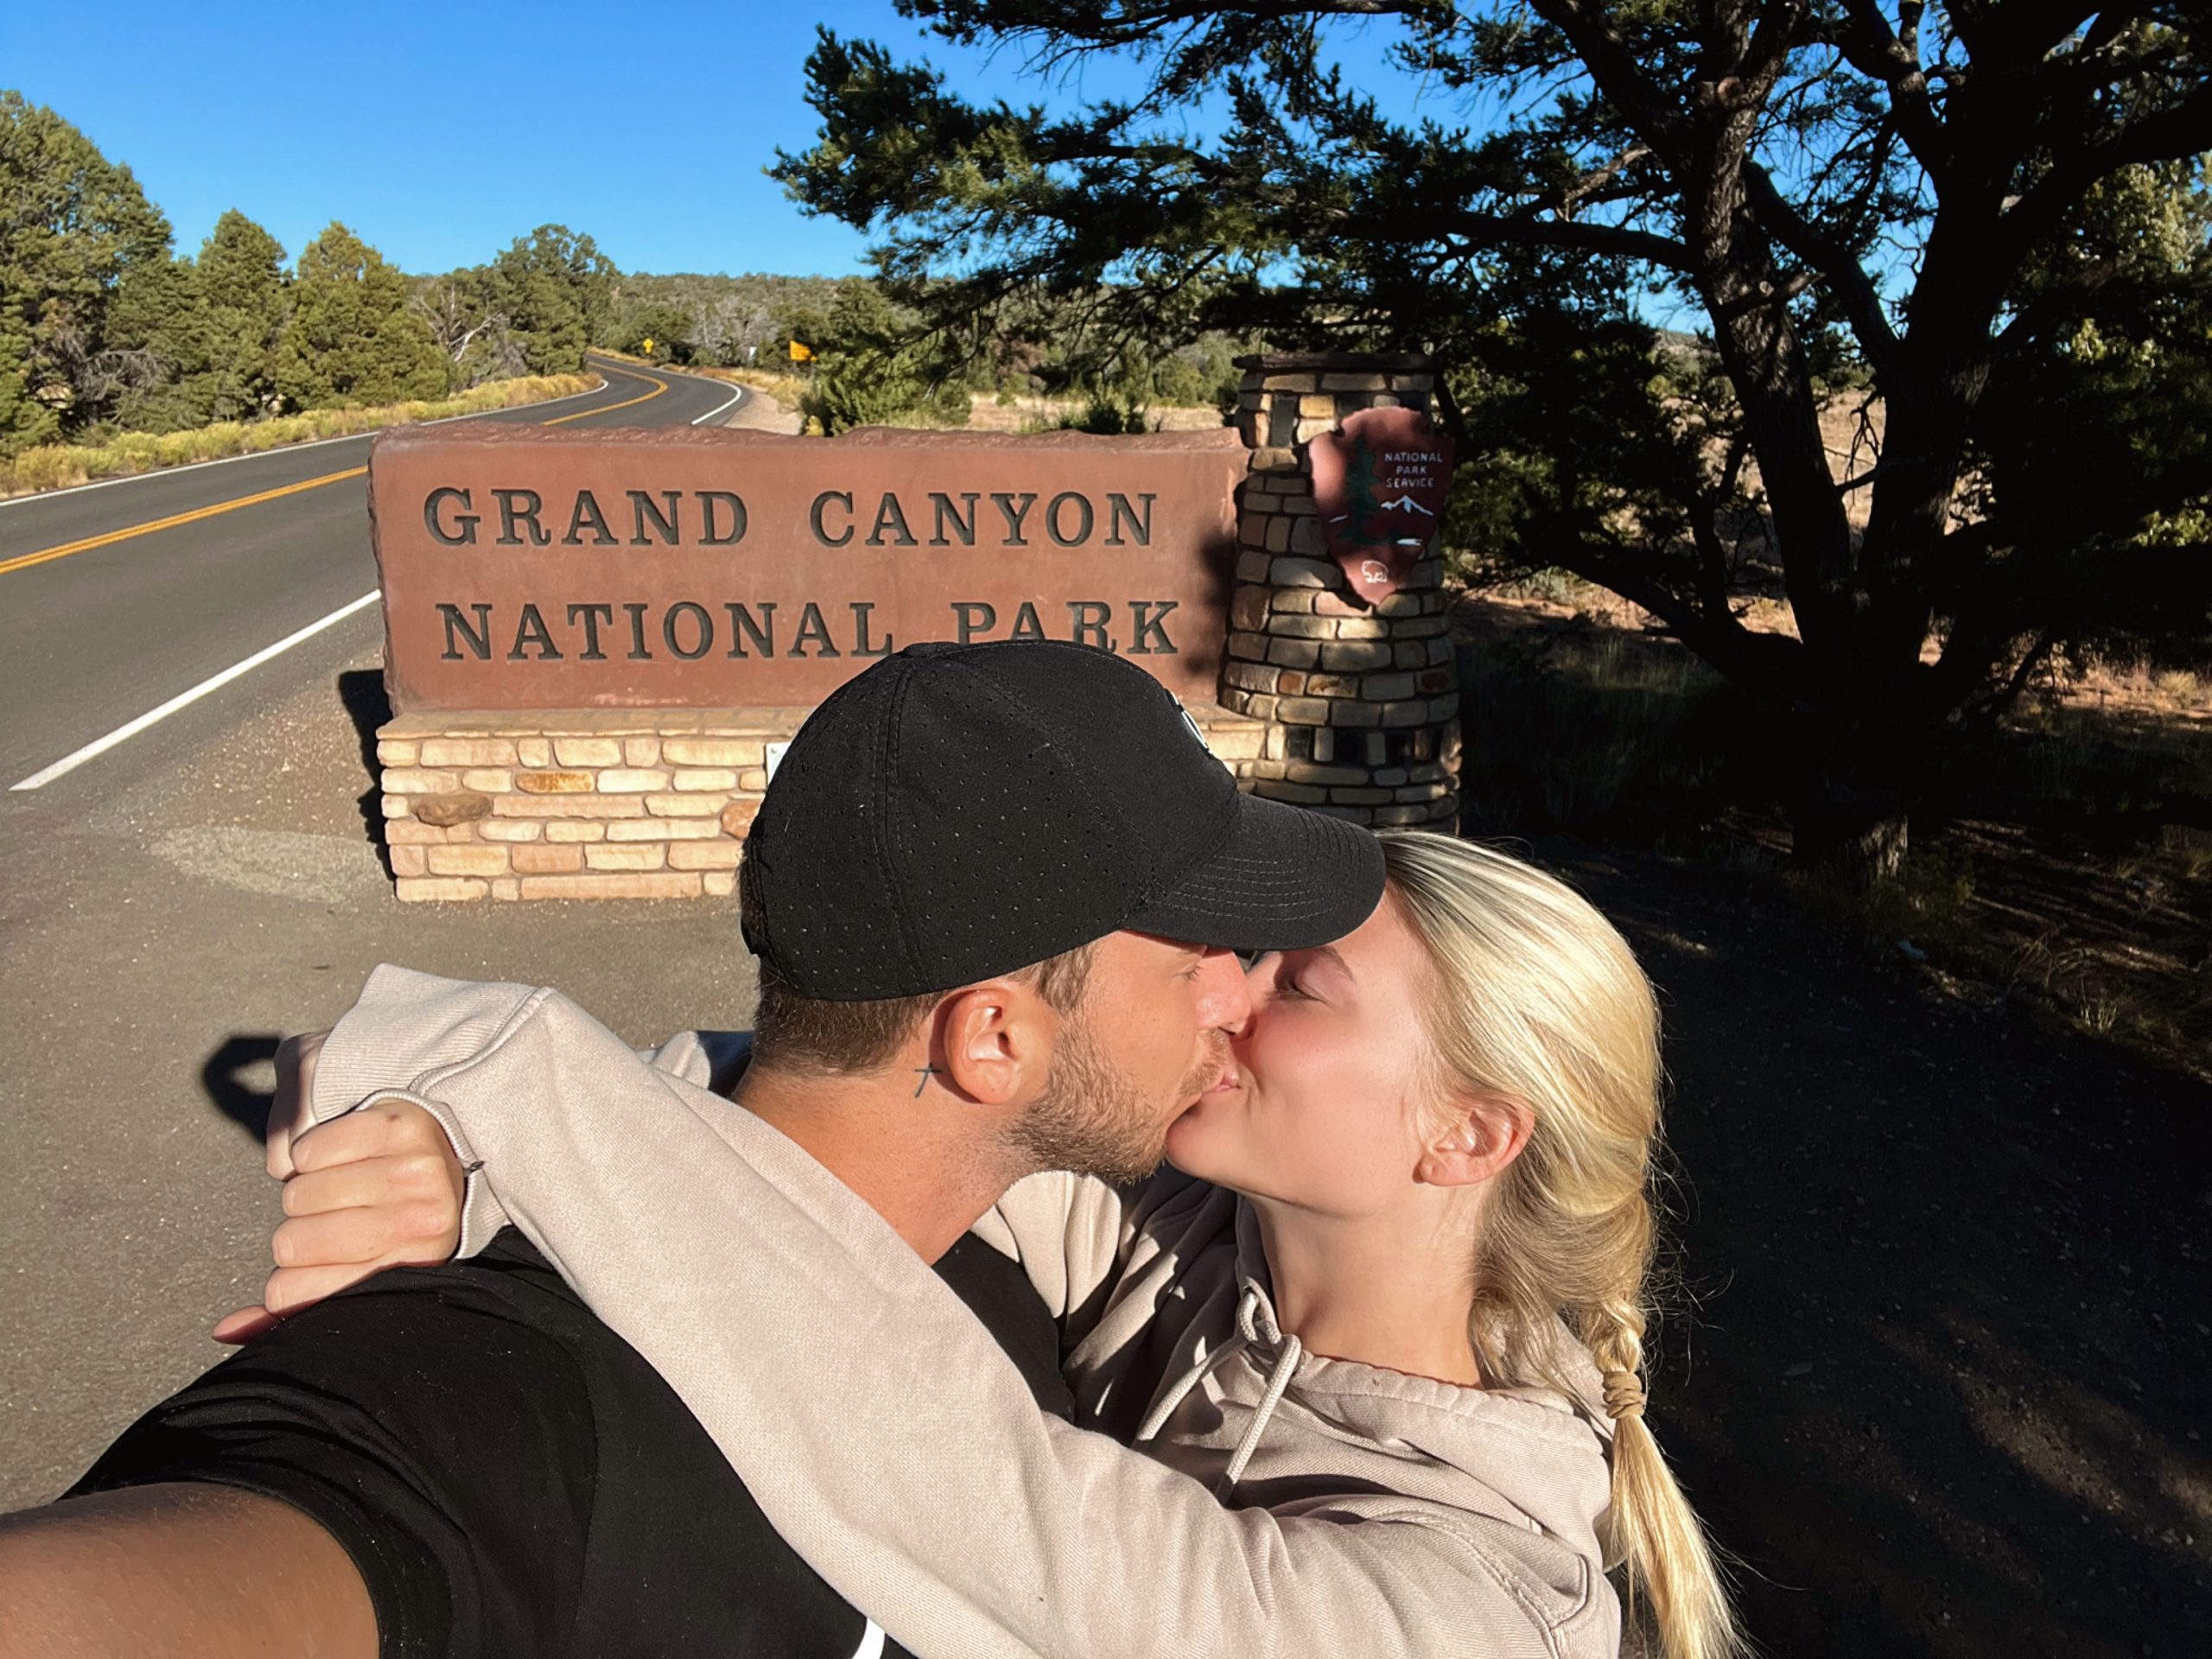 Travel Influencers Kaylee Killion and Cody Nelson Ignite Social Media with Intimate Escapades at the Grand Canyon